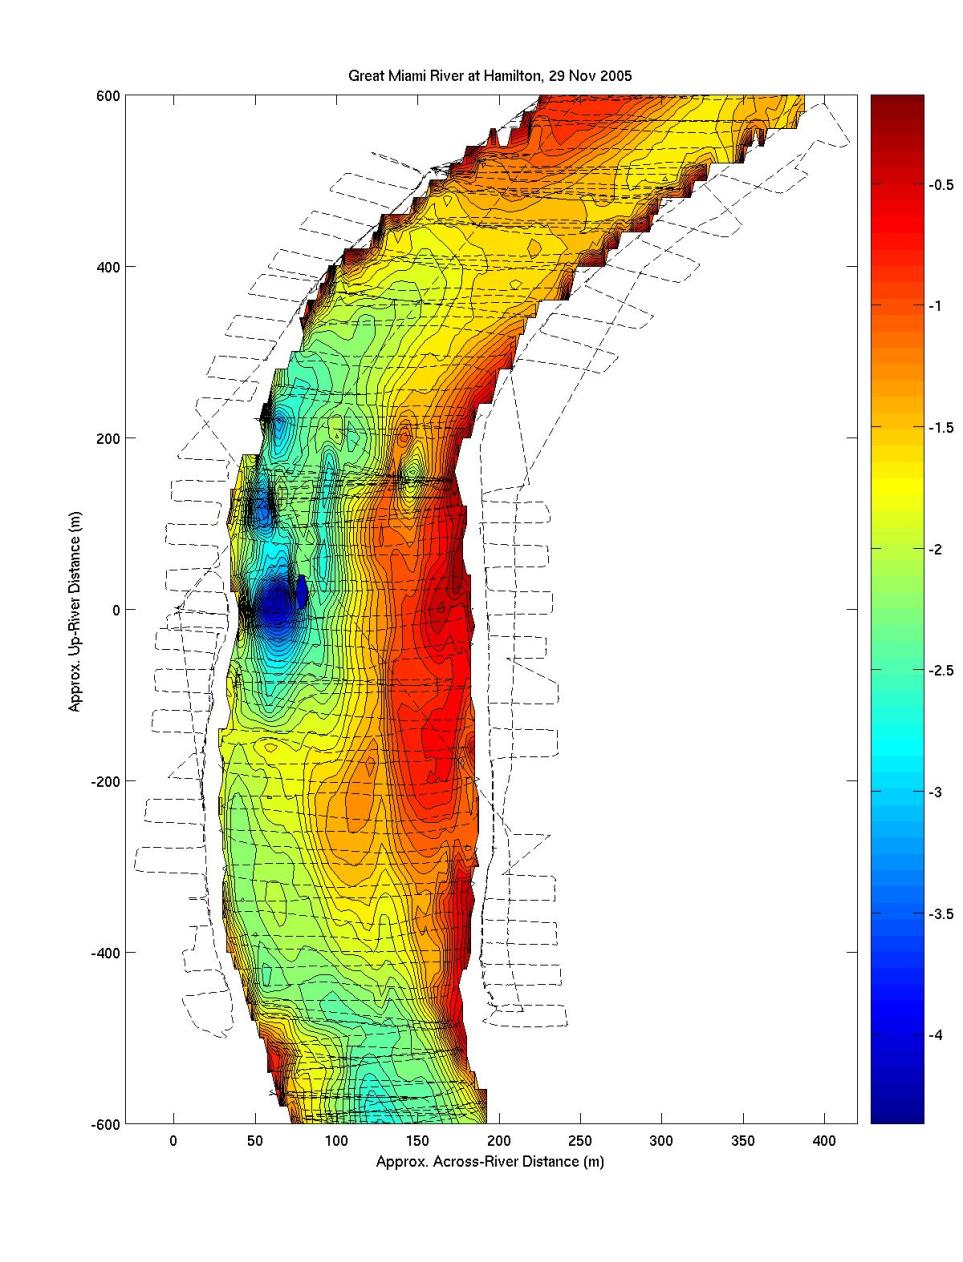 Figure 9. Bathymetric survey of the Great Miami River in Hamilton, OH, conducted on 29 Nov 2005.